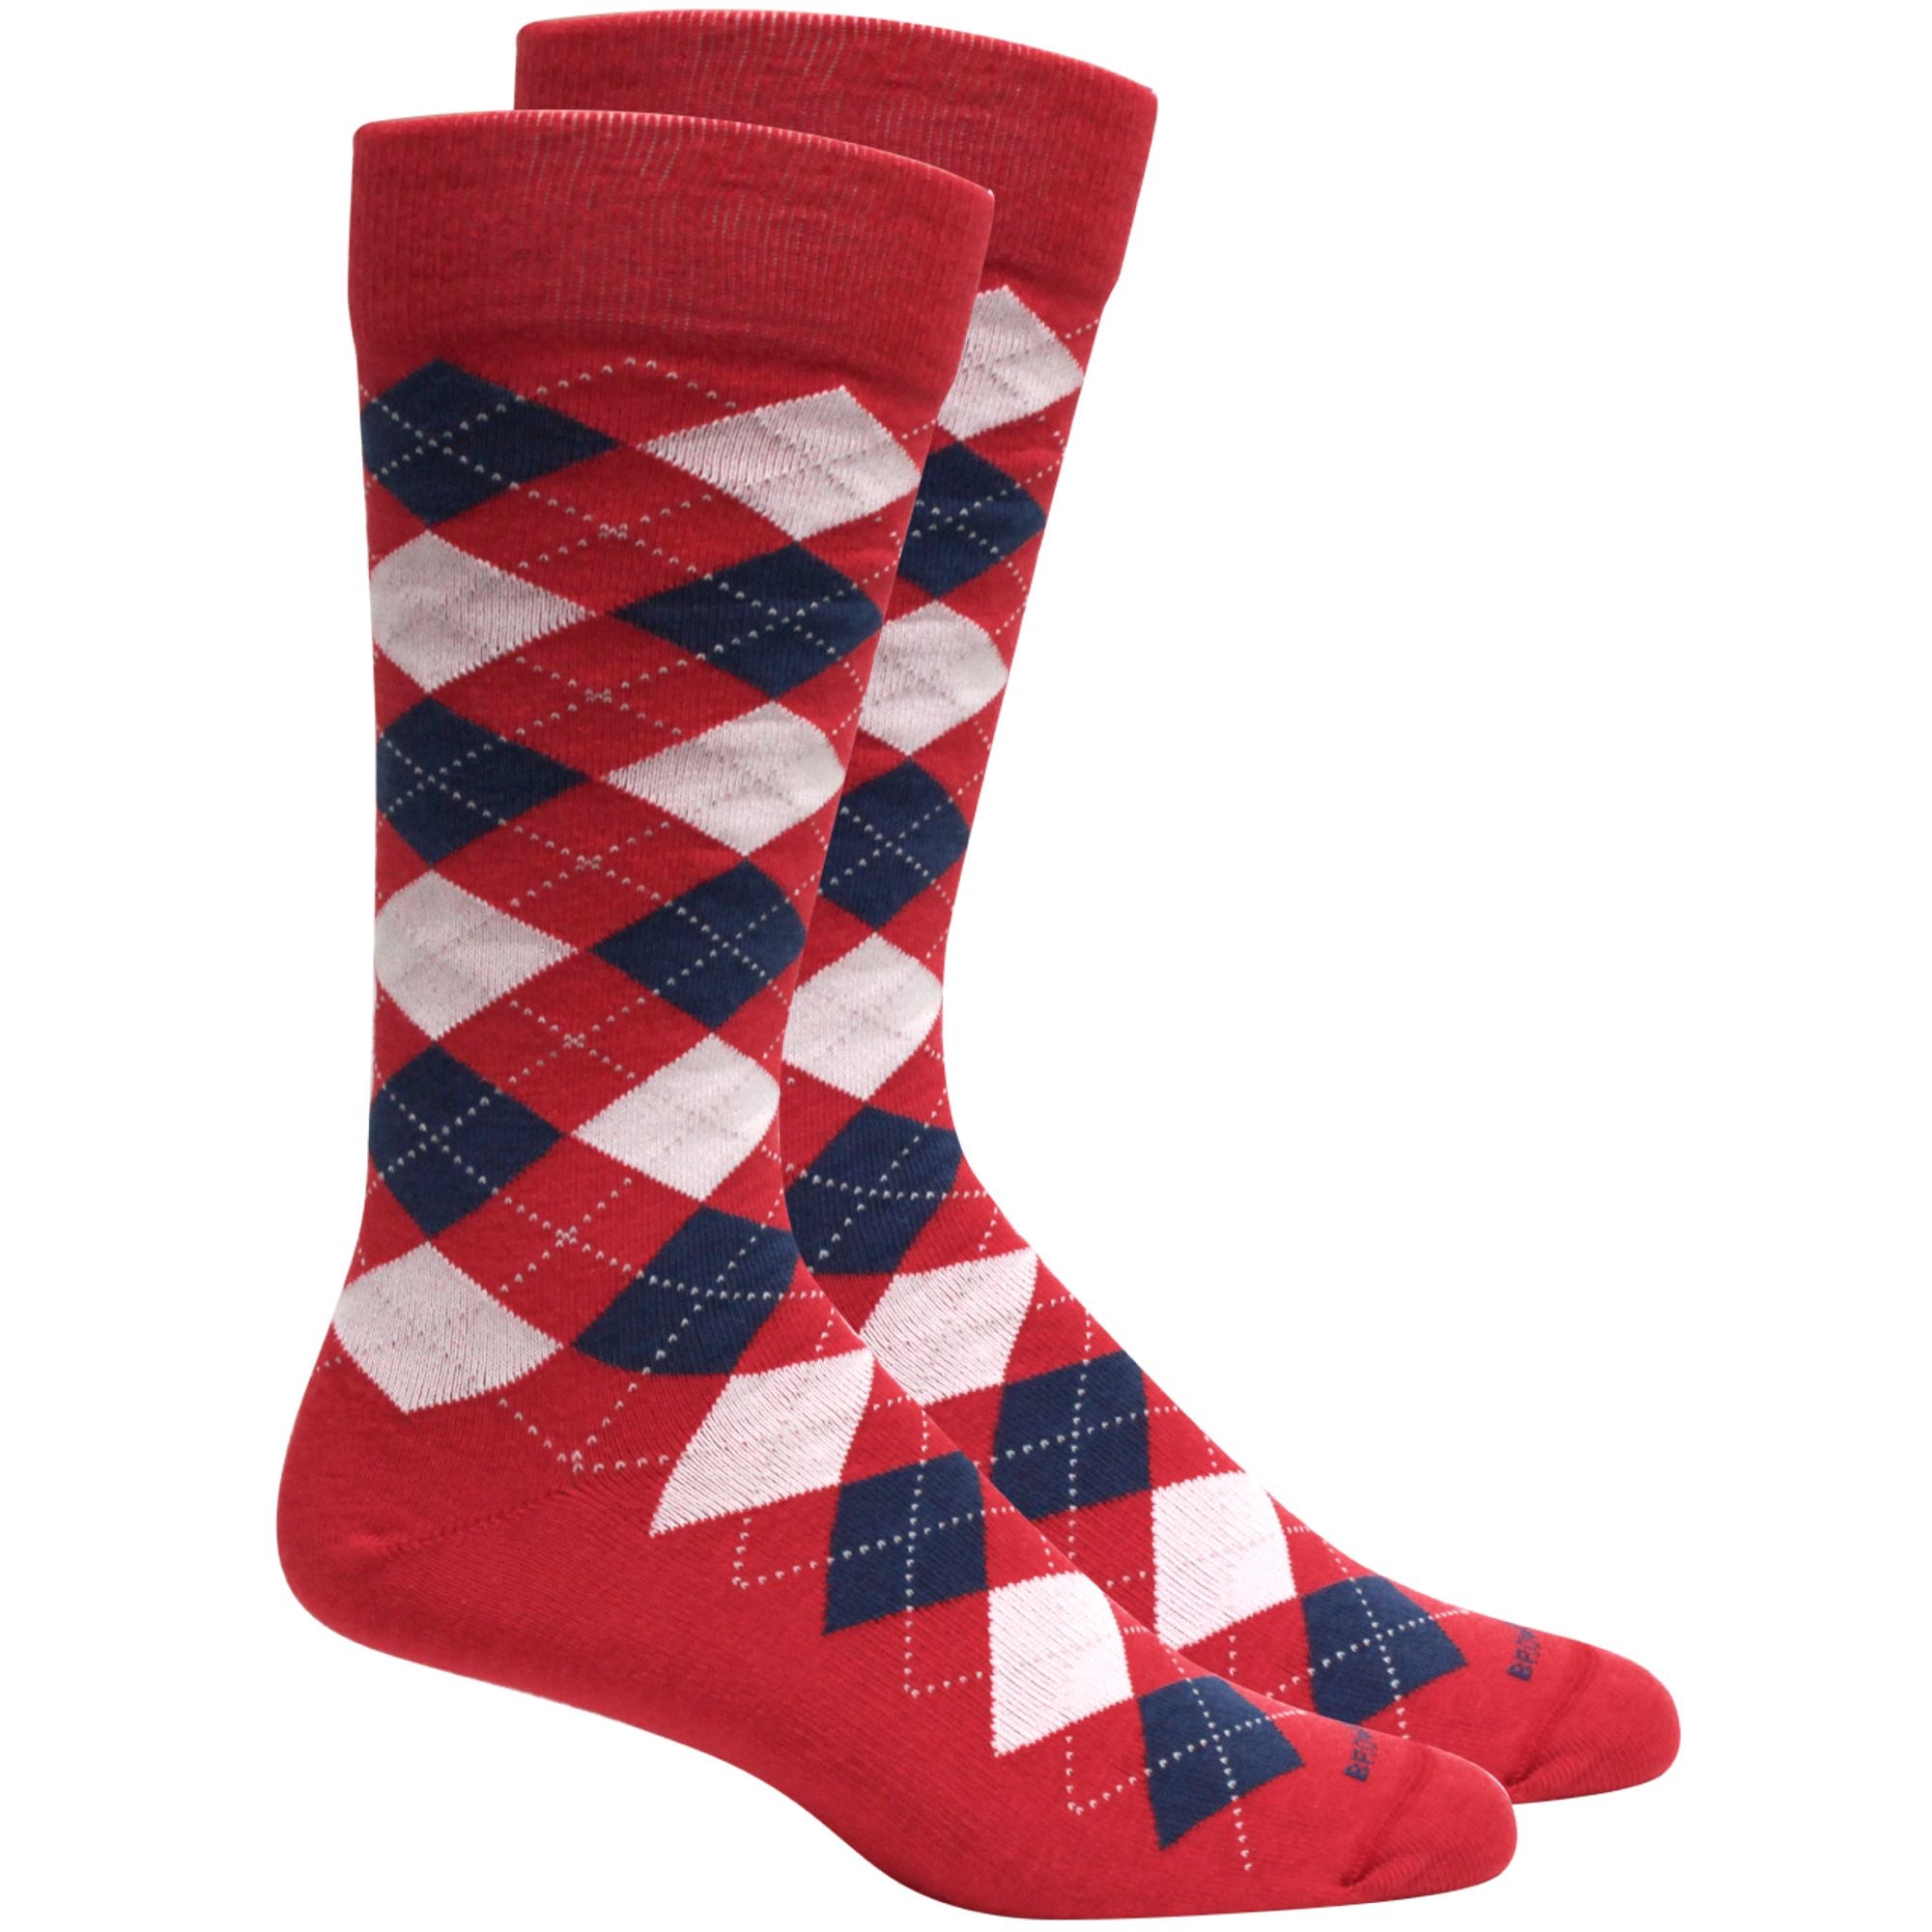 Argyle Cotton Socks in Red and Royal Blue by Brown Dog Hosiery